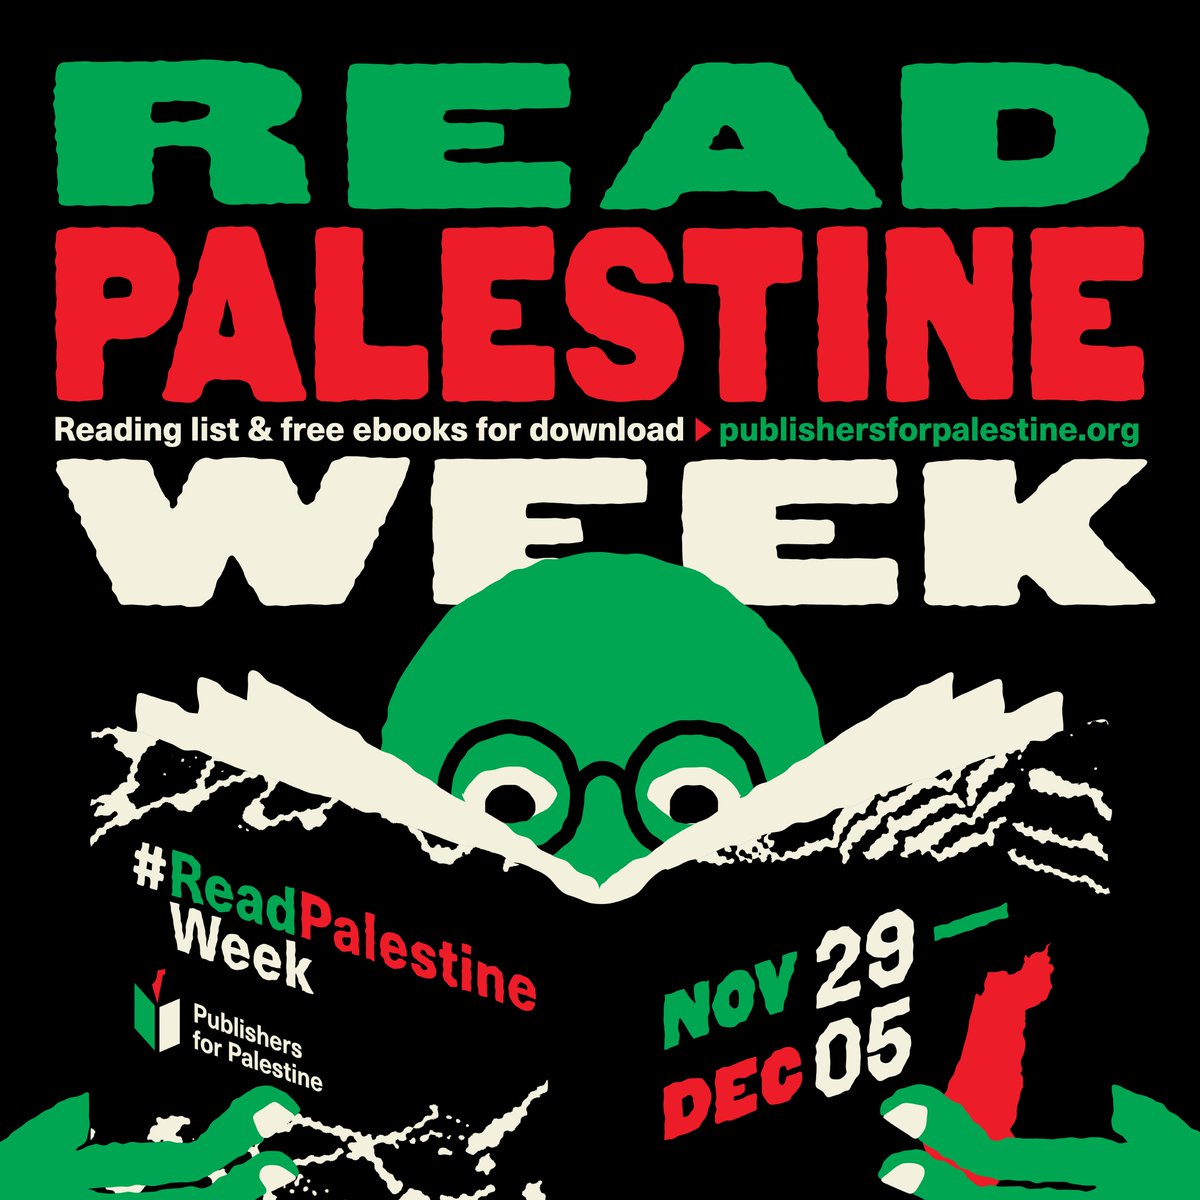 Read Palestine Week: Nov. 29-Dec. 5. Read books by Palestinian authors and books about Palestine all week, starting on the International Day of Solidarity with the Palestinian People. #ReadPalestine #LirelaPalestine #اقرأ_فلسطين